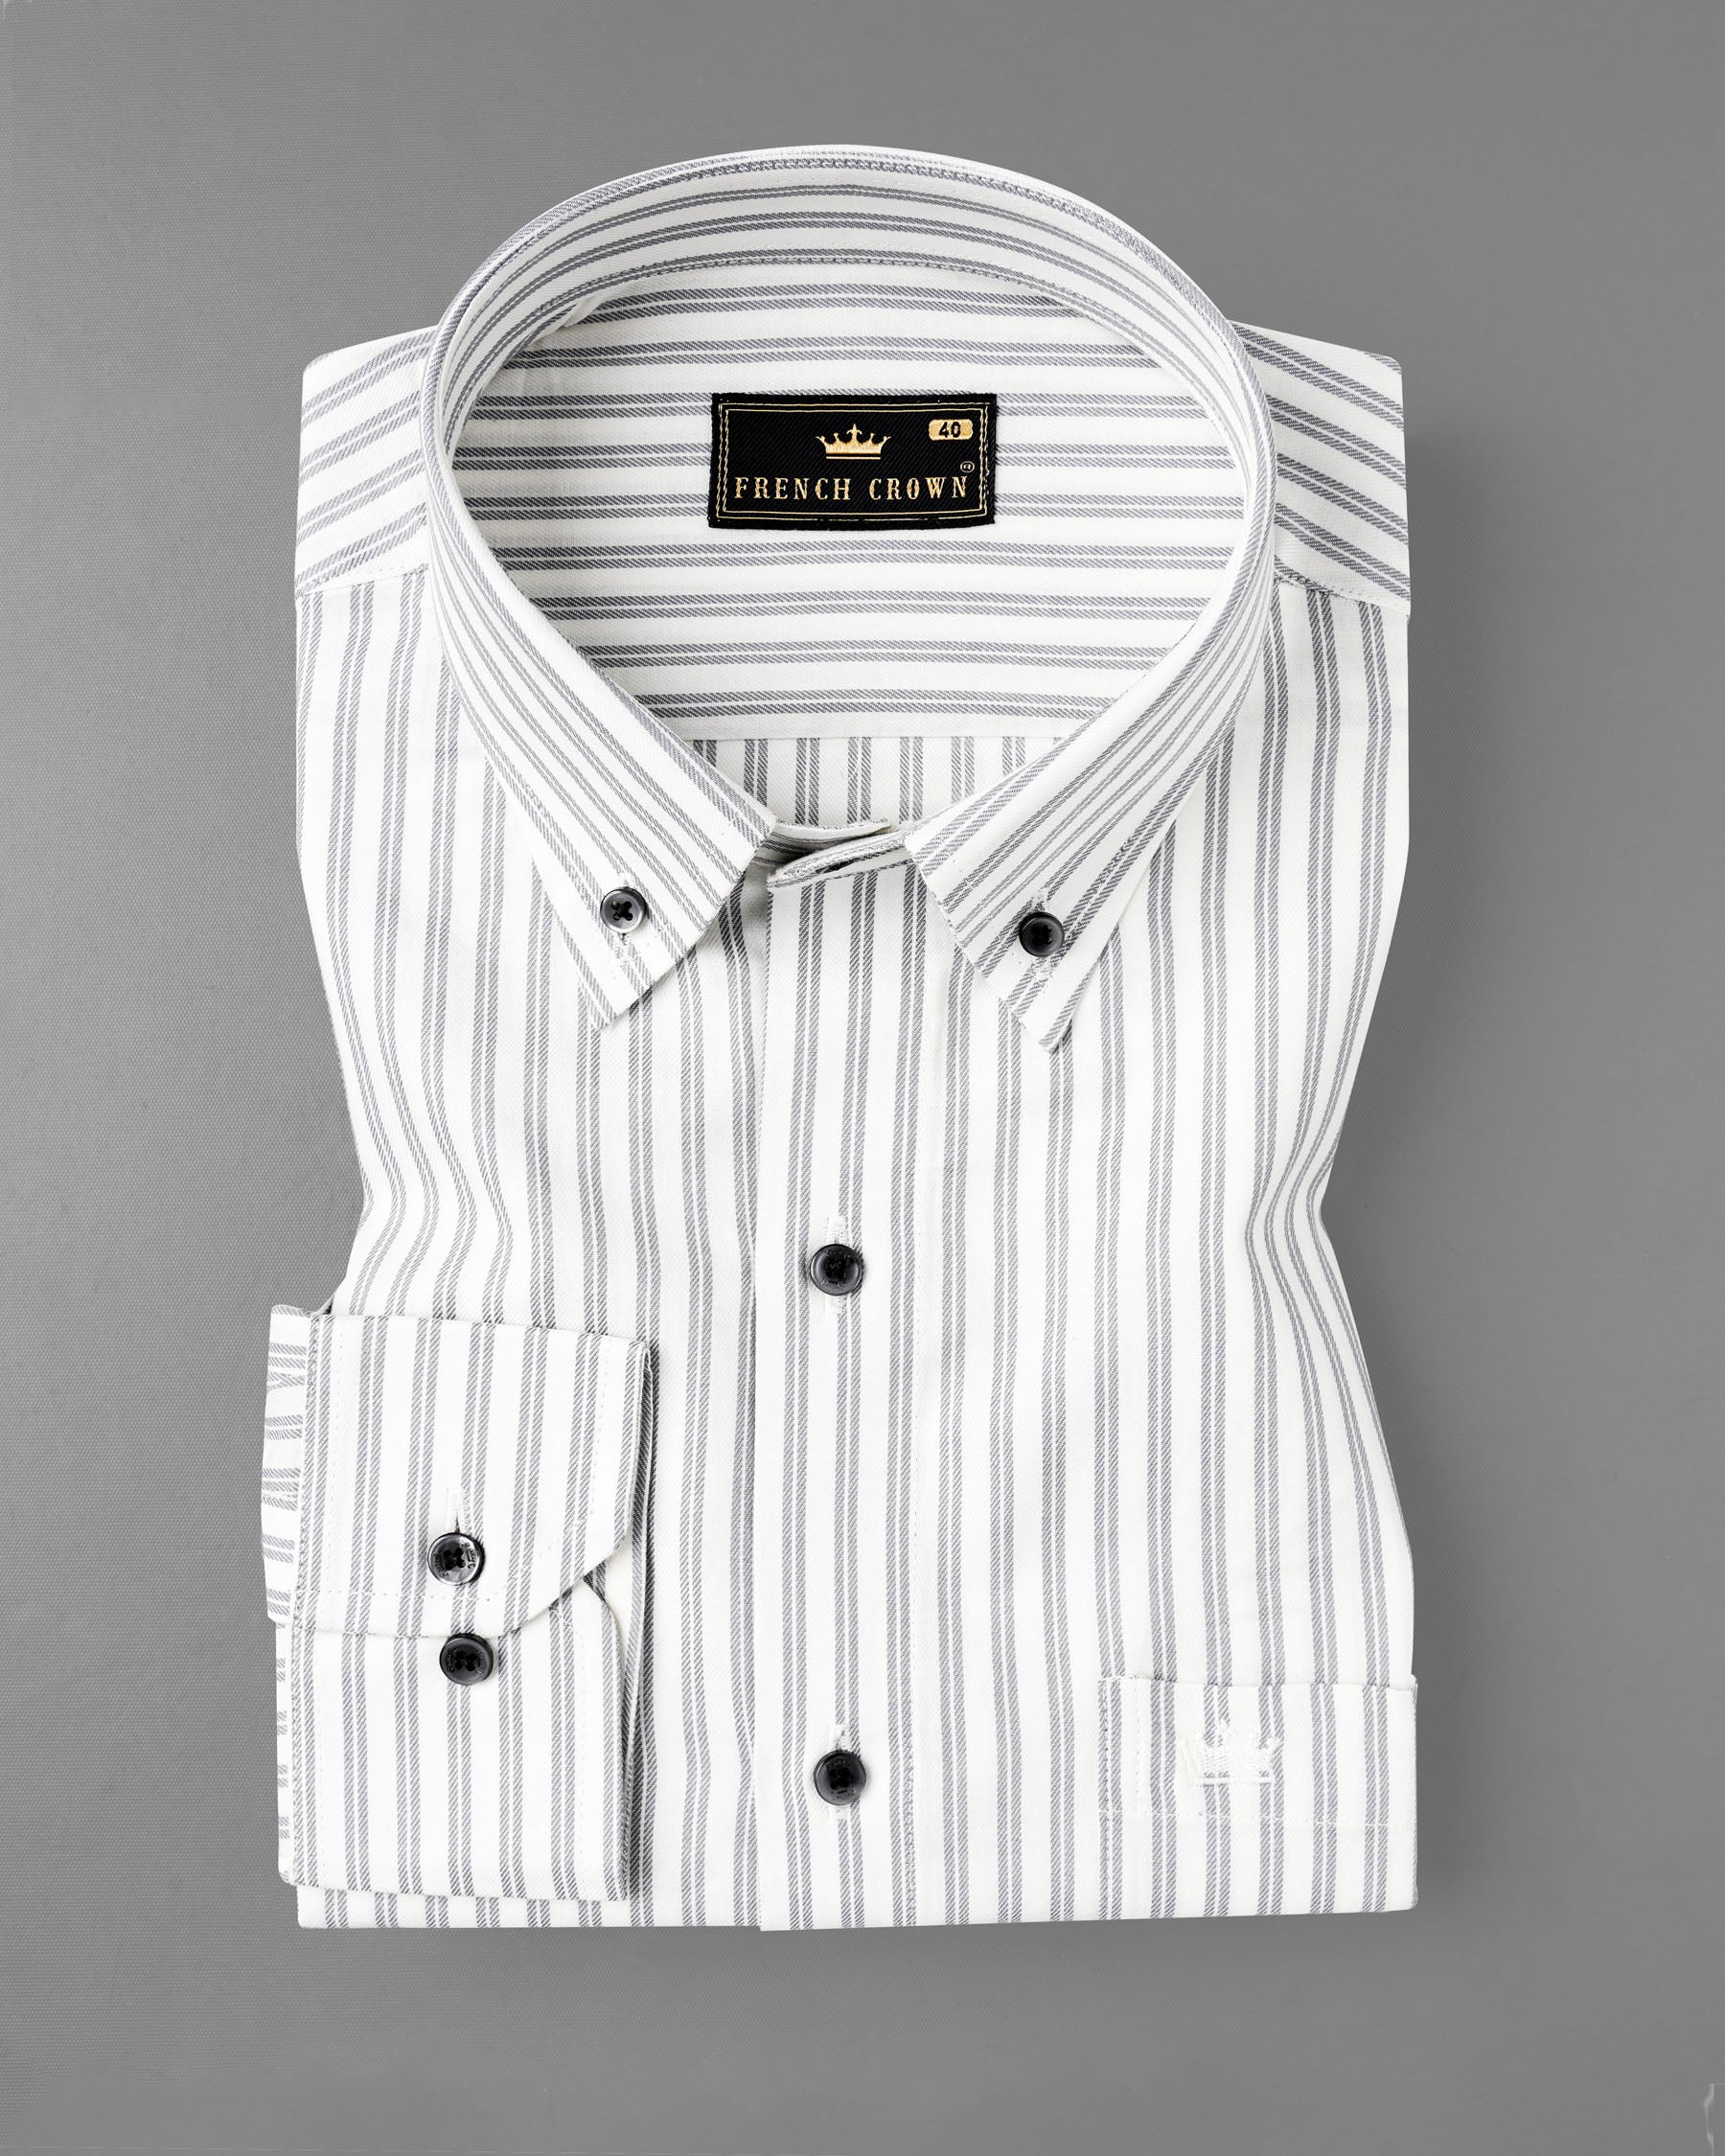 Off White with StarDust Gray Twill Striped Premium Cotton Shirt